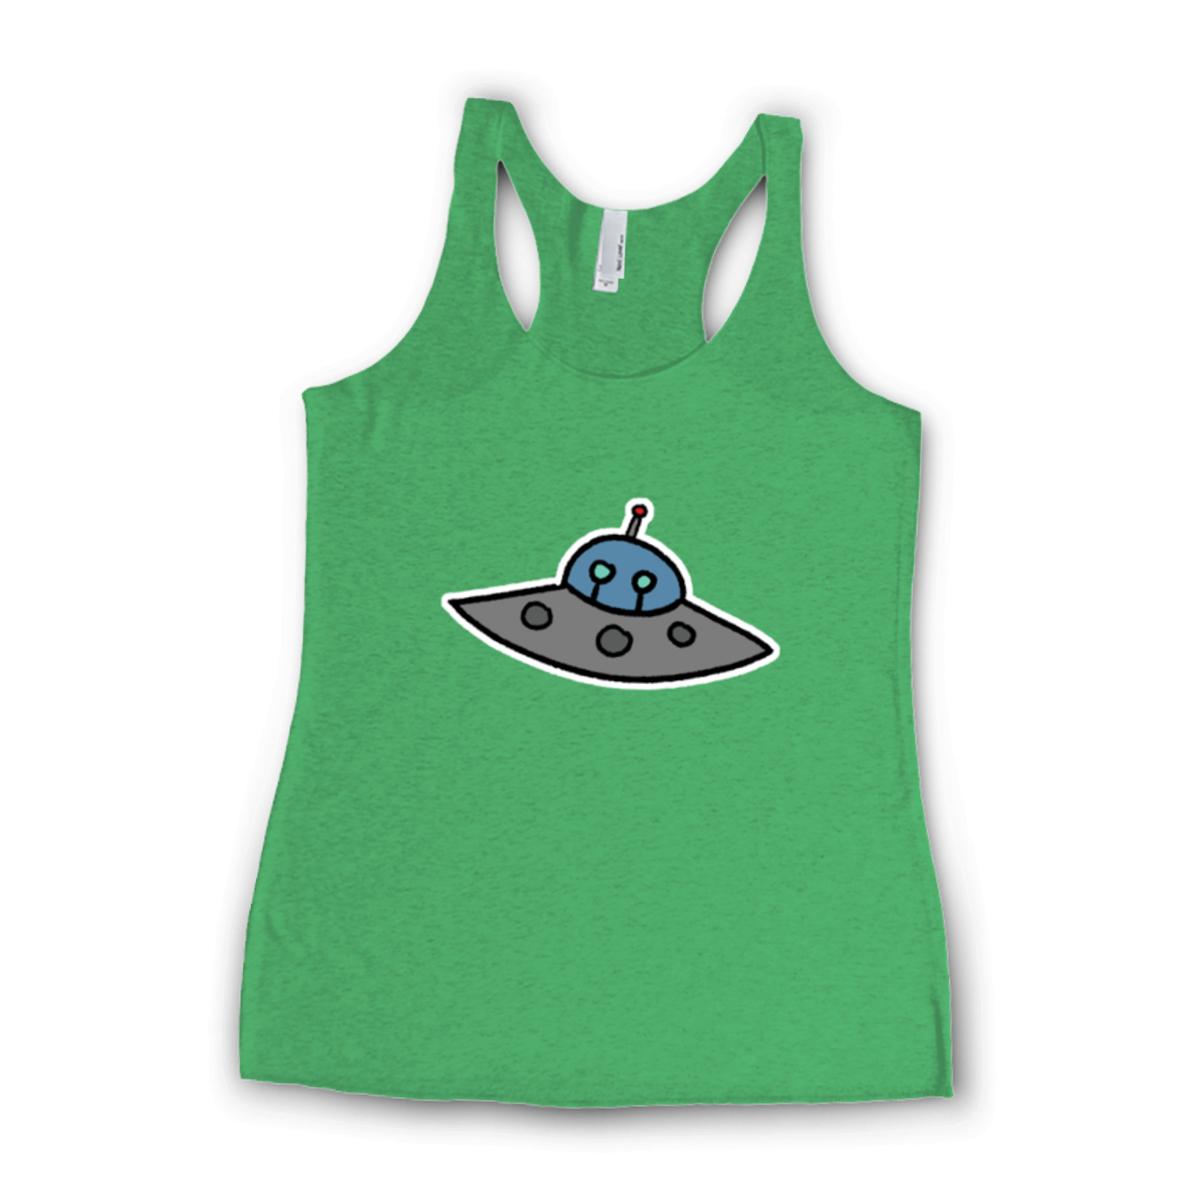 Flying Saucer Ladies' Racerback Tank Extra Small envy-green